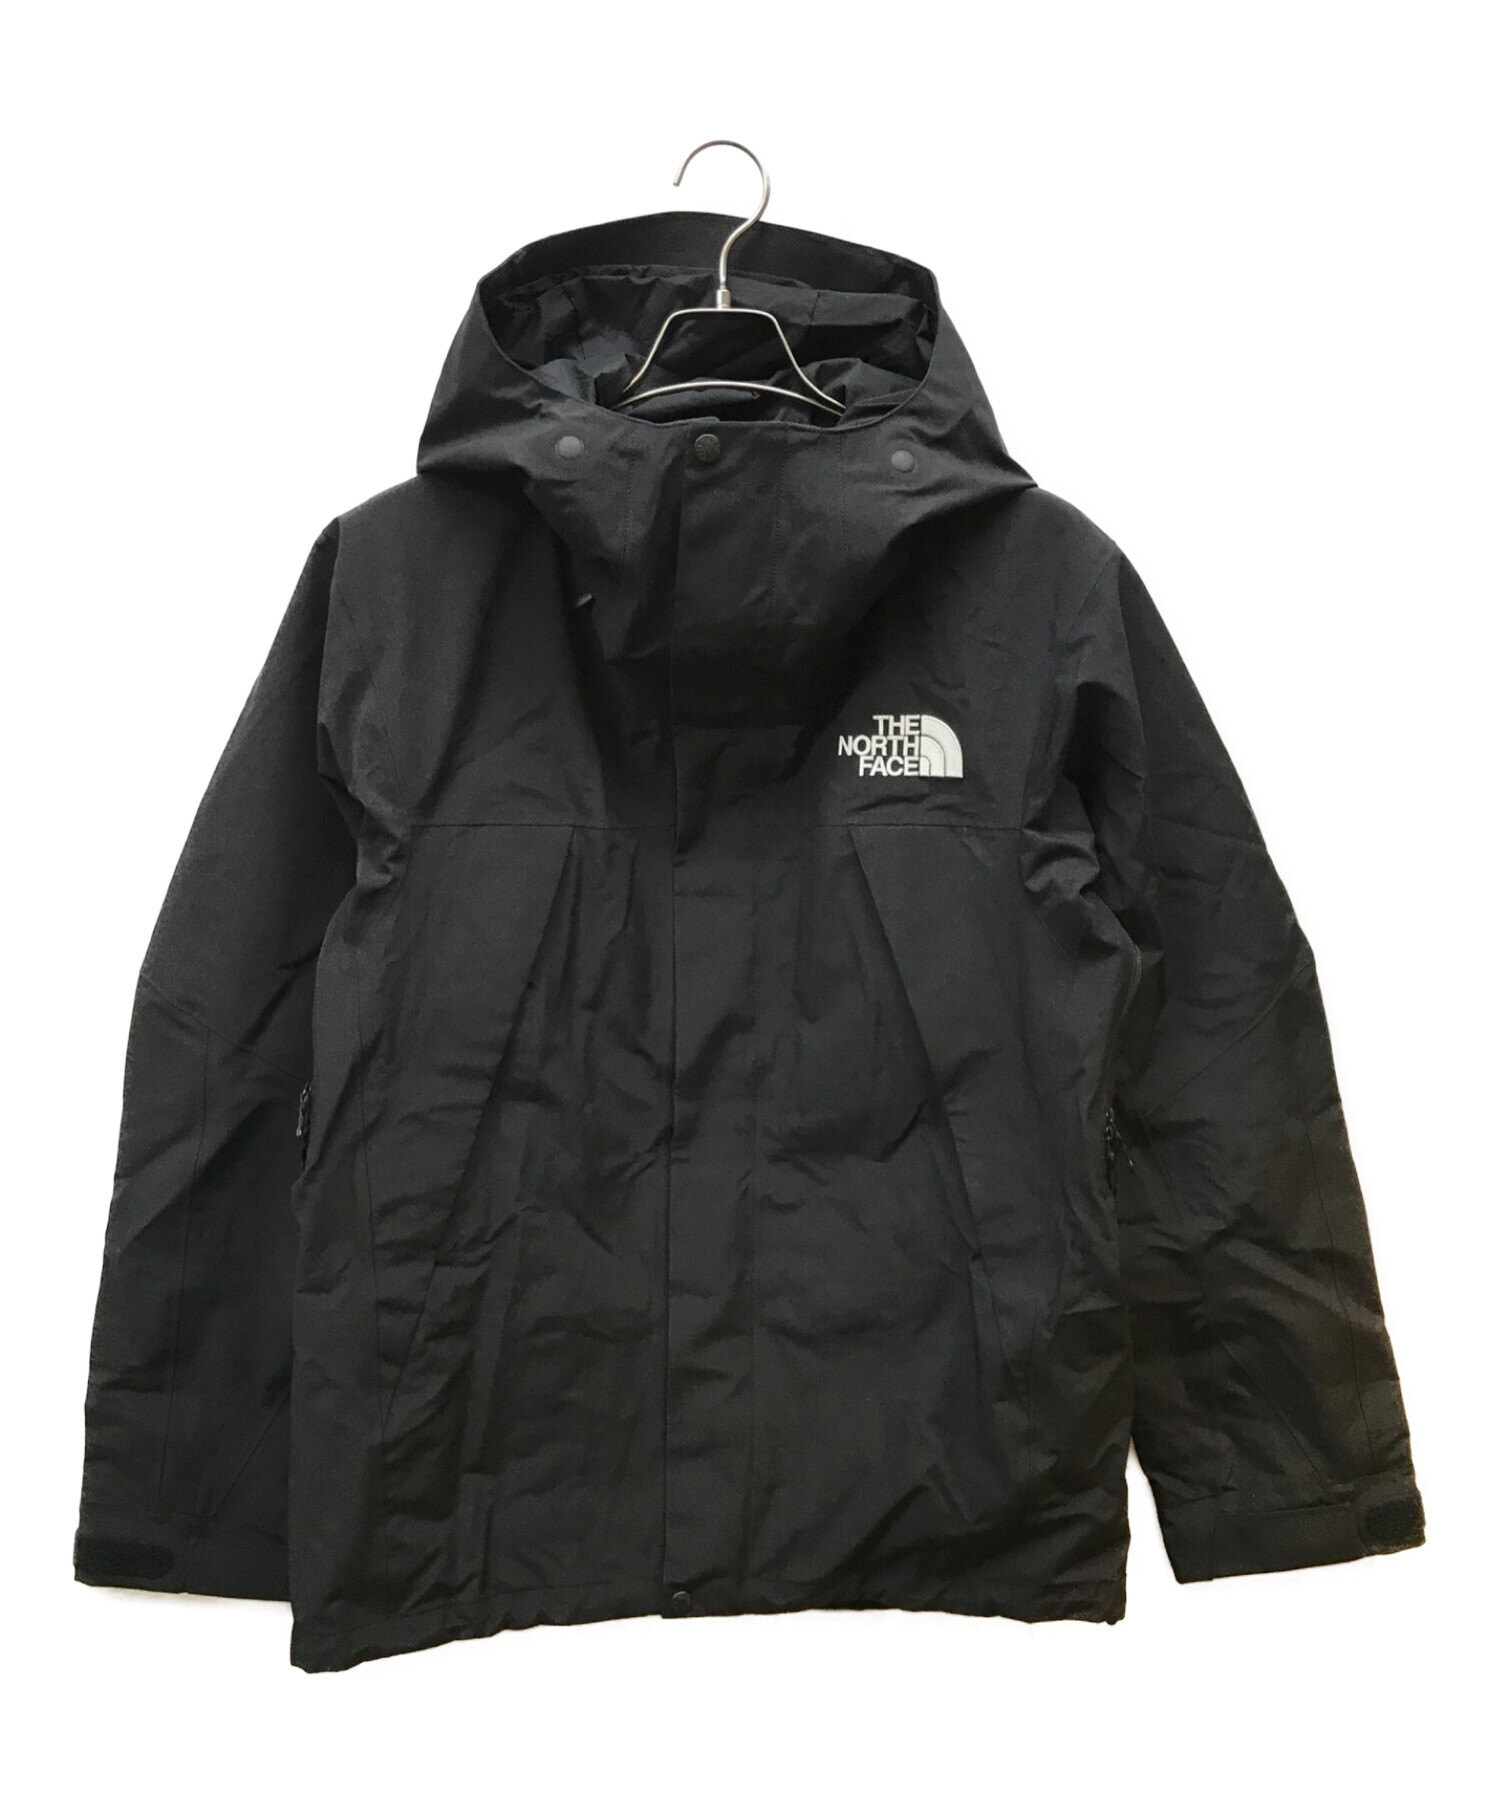 THE NORTH FACE MOUNTAIN JACKET XLePTFE裏地